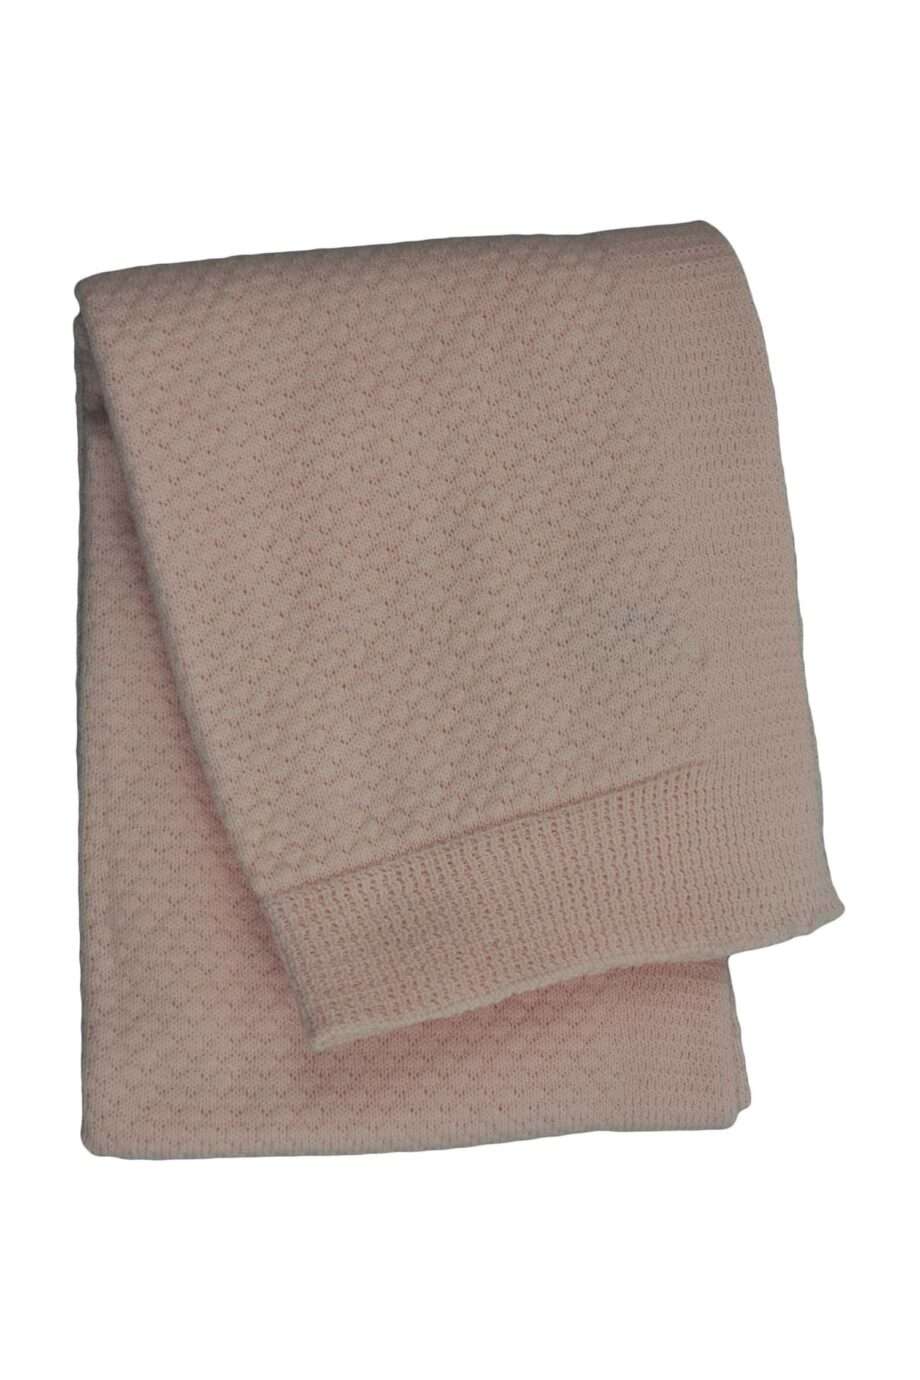 liz baby pink knitted cotton little blanket small